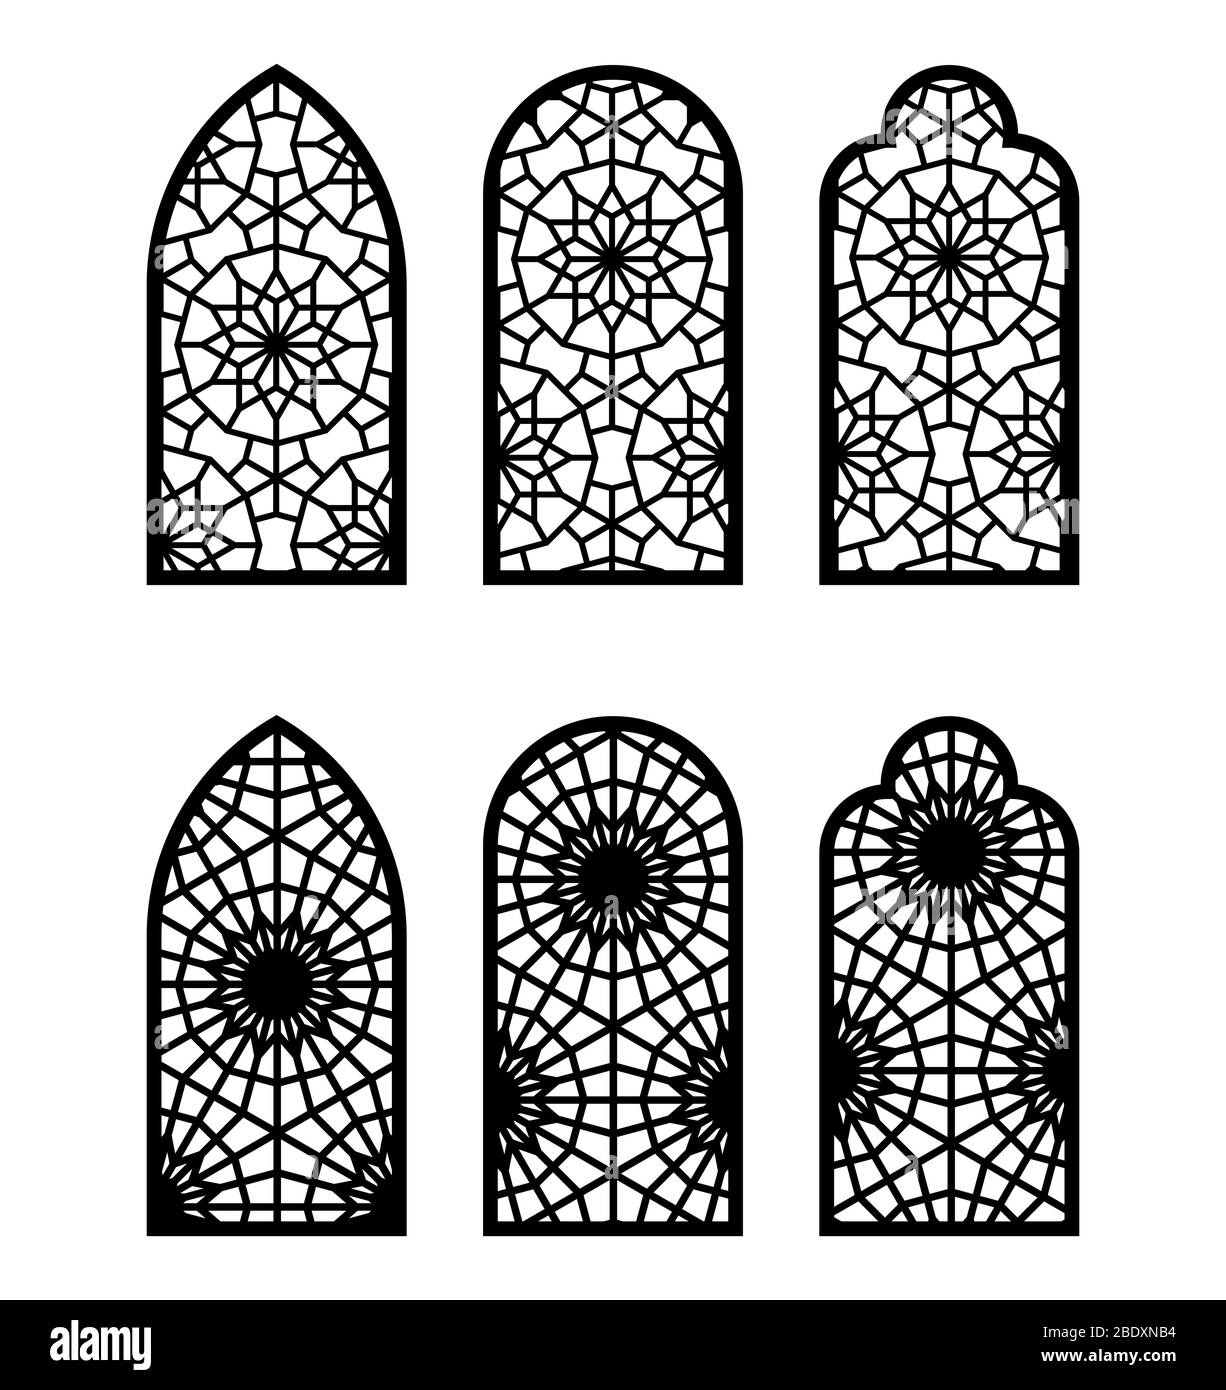 Moroccan arch window or door set. Cnc pattern, laser cutting, vector template set for wall decor, stencil, engraving in moroccan style Stock Vector